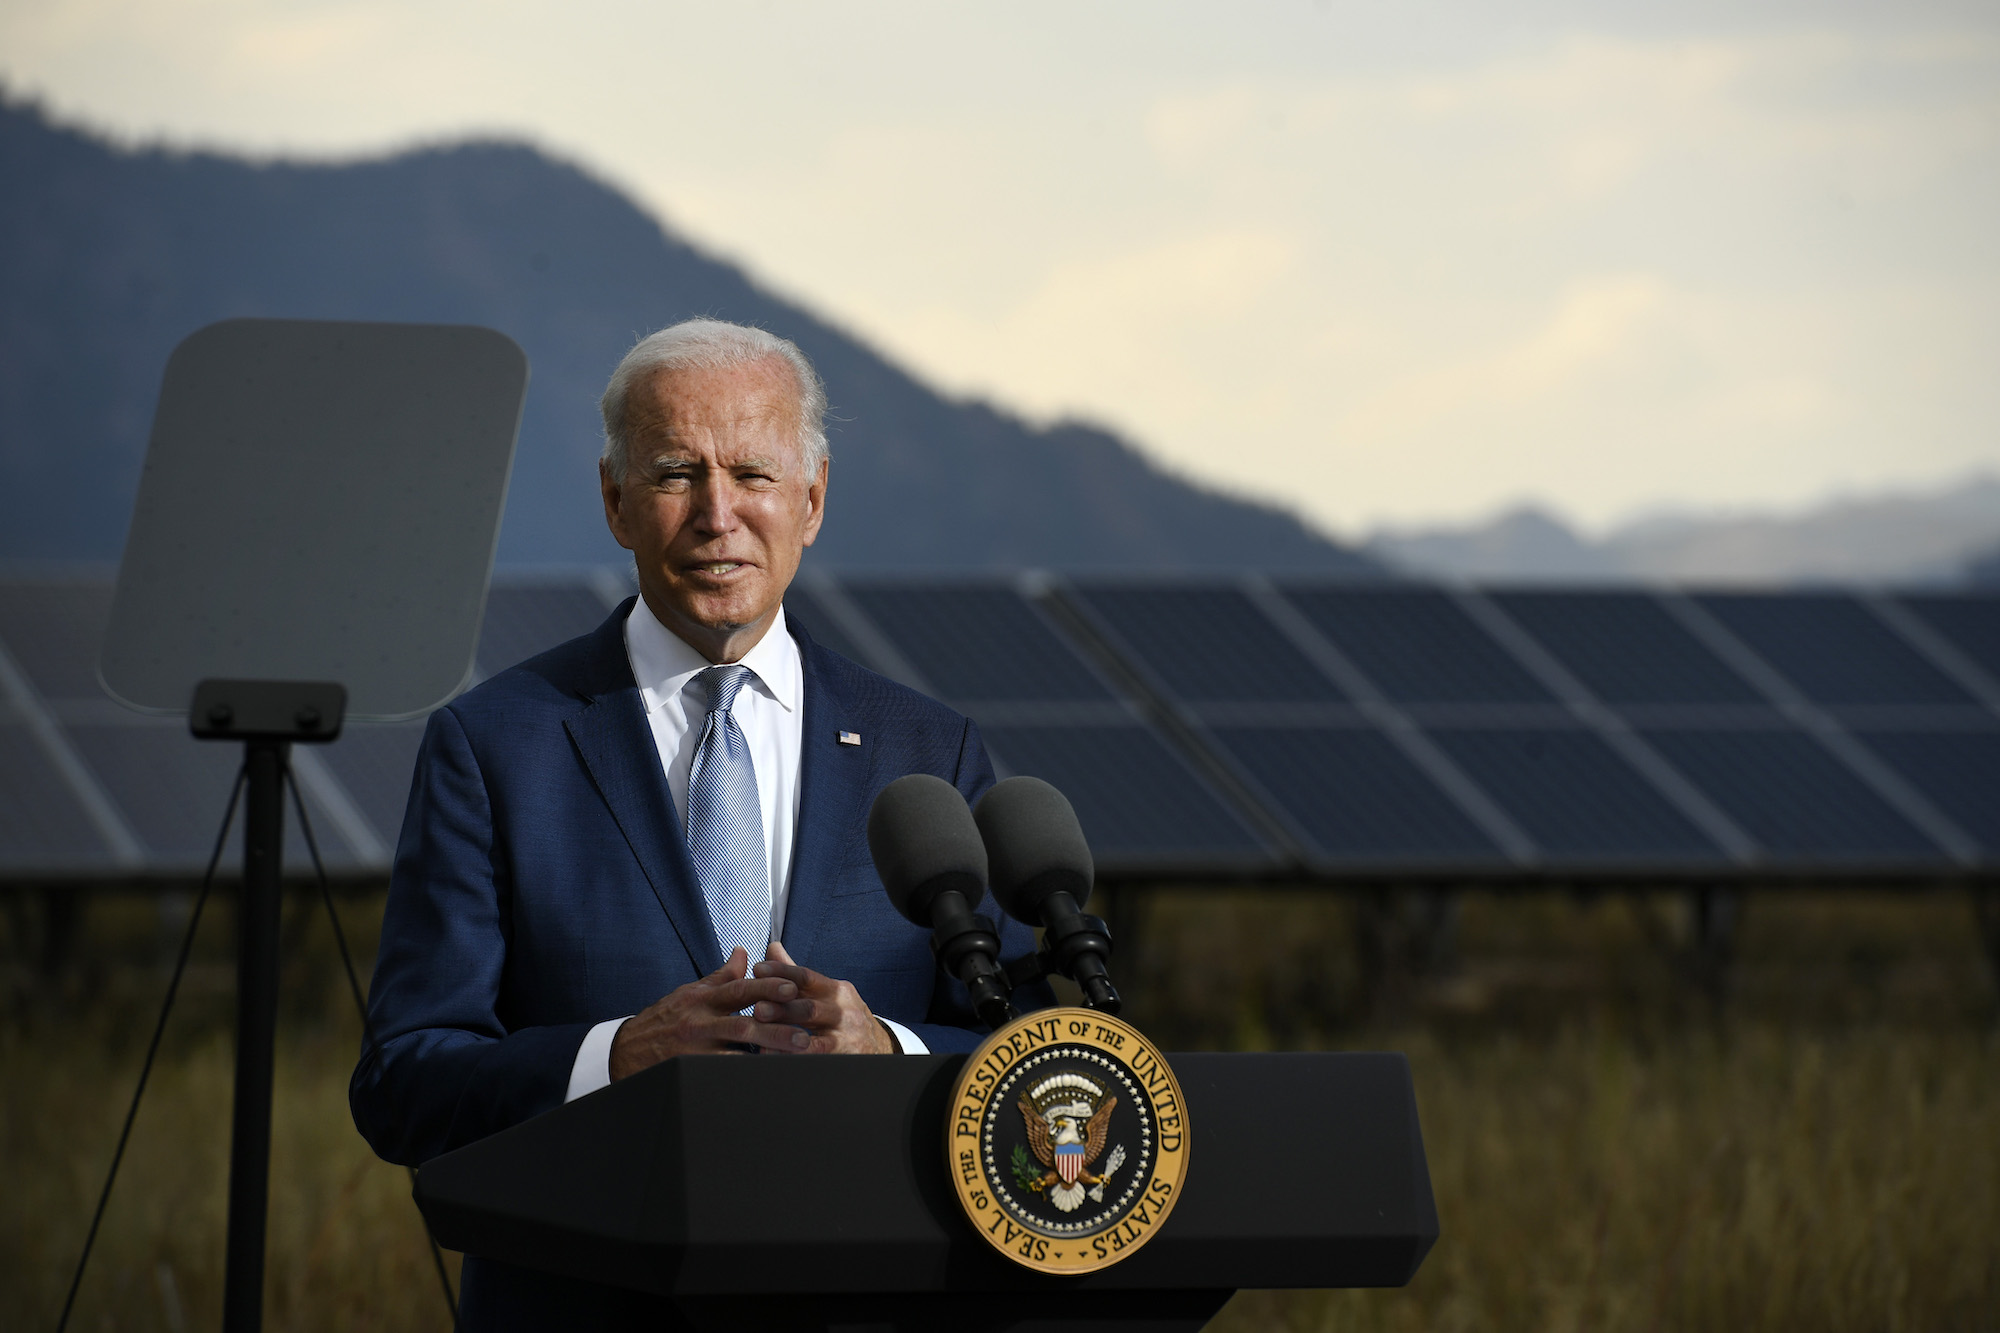 President Joe Biden stand on a podium in front of a large solar panel.